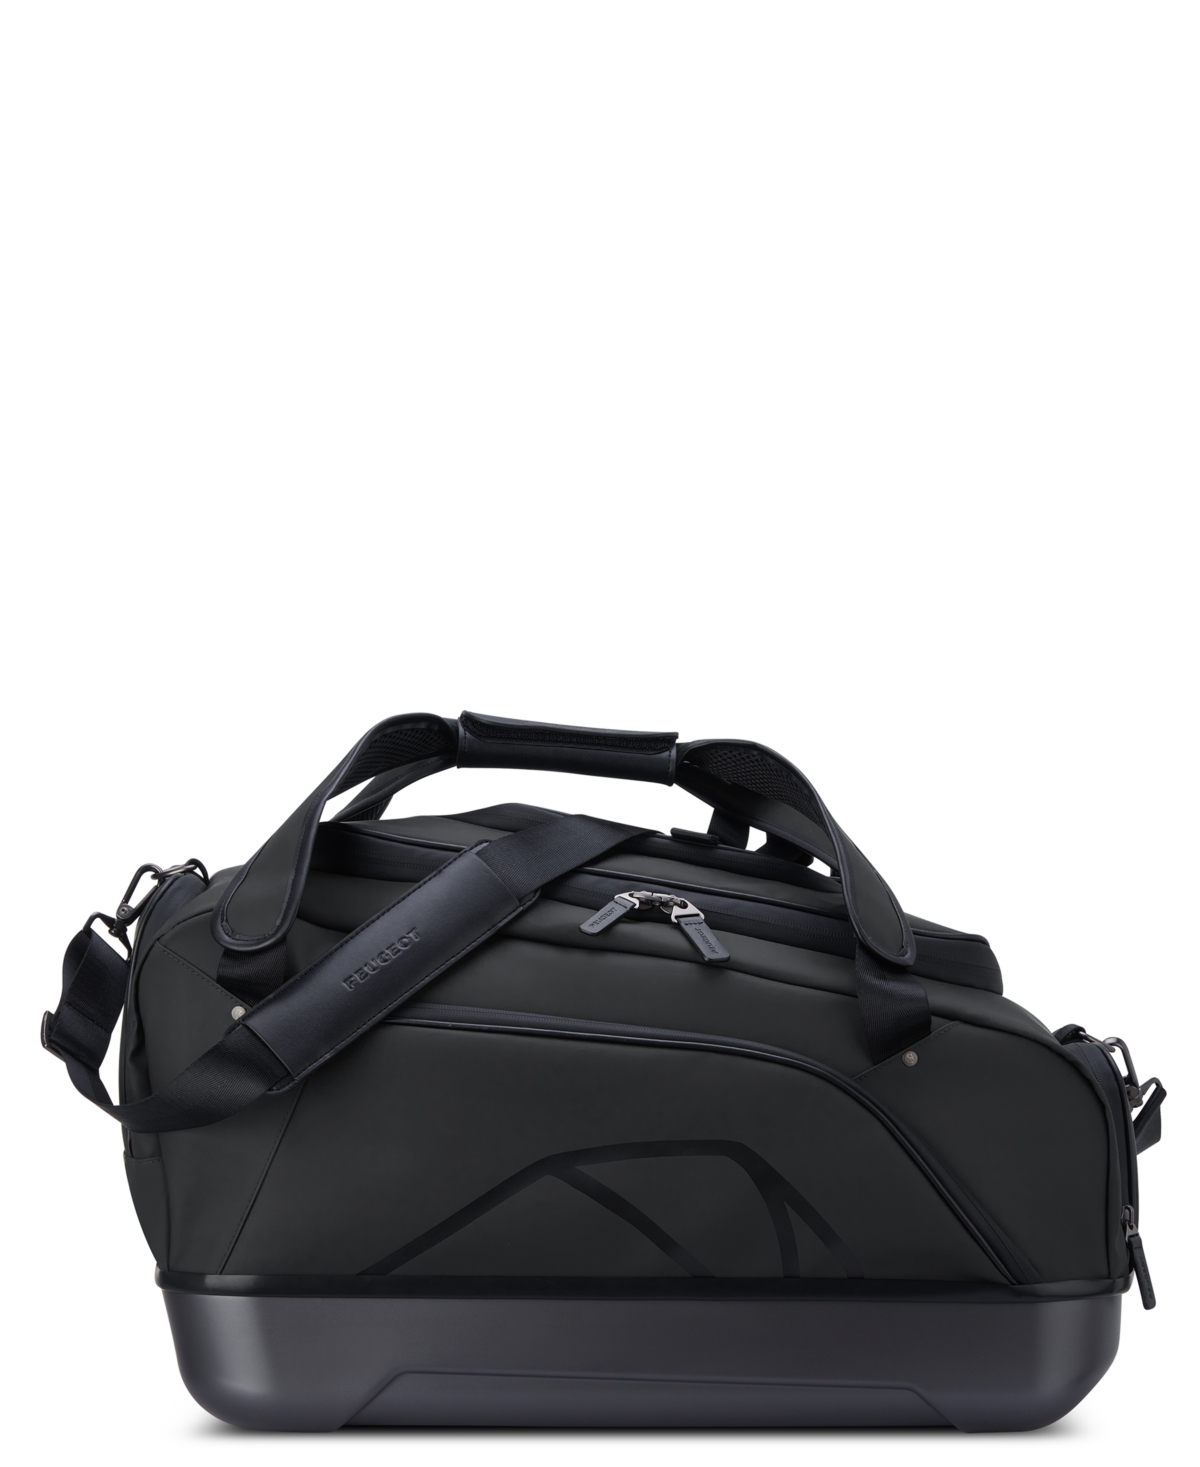 Peugeot Voyages 21" Carry-on Duffle Bag In Black